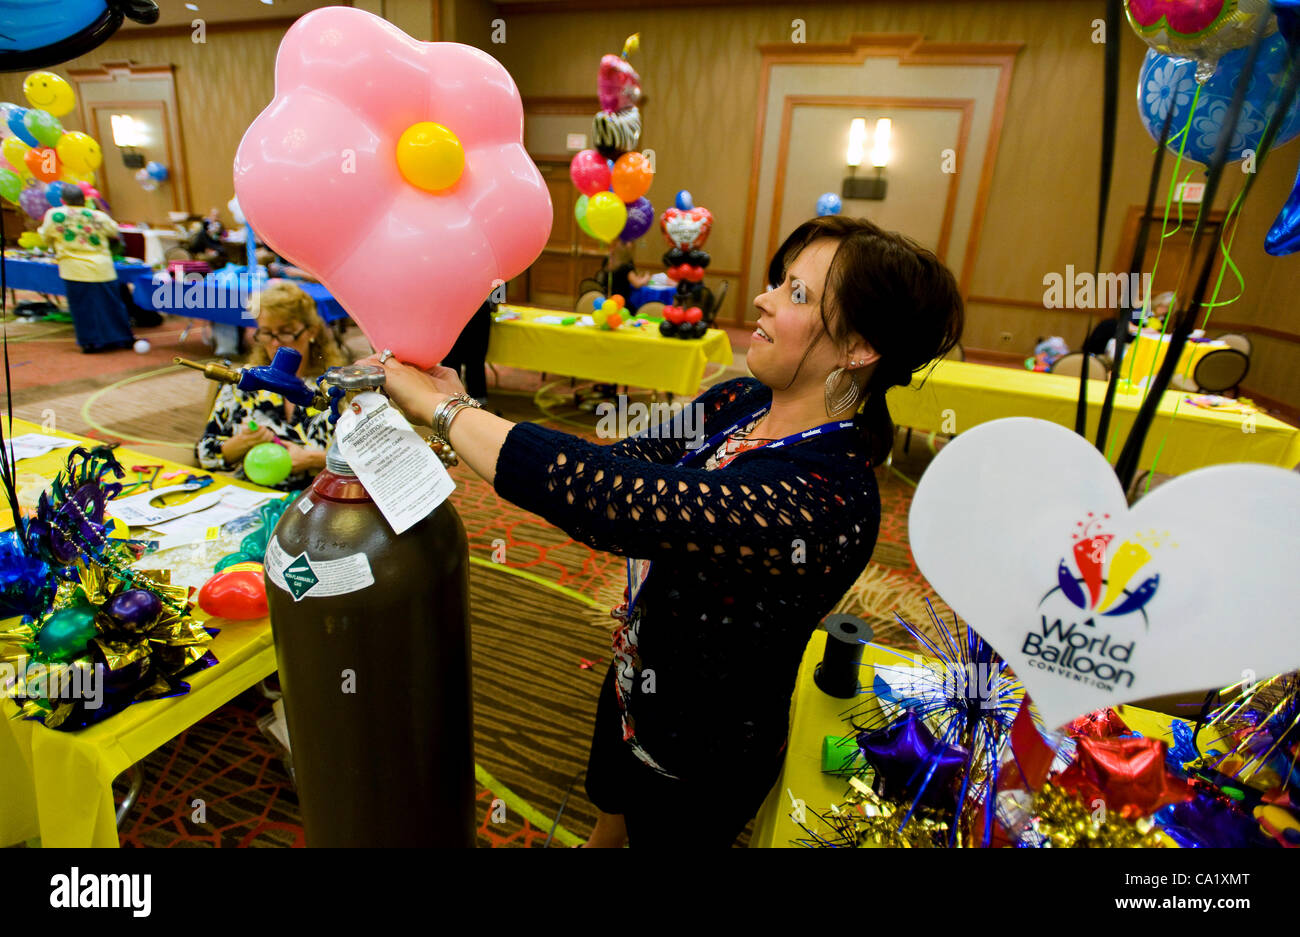 Dallas, Texas, US. Mar 21, 2012. Tammy Bessette of Party Town in Woonsocket, RI, is one of dozens of people taking test to become certified balloon artist during biennial World Balloon Convention at Sheraton Dallas Hotel. Approx. 700 balloon artist delegates and competitors from 46 countries attend. Stock Photo